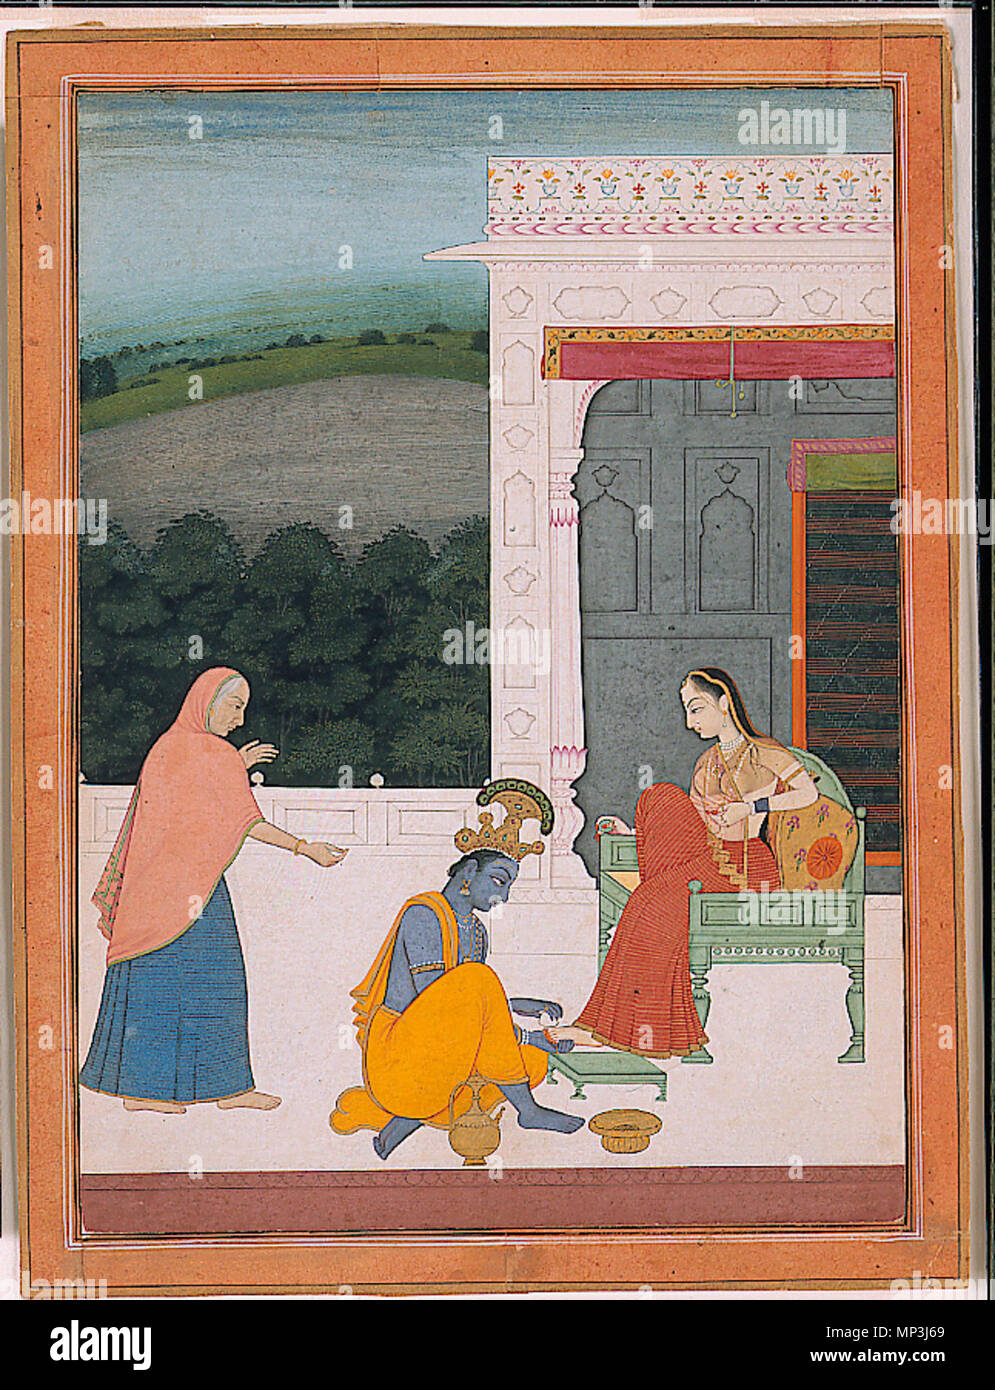 . English: Series Title: Eight Types of Heroines (possibly) Suite Name: Ashta-nayika (possibly) Display Artist: Nainsukh Creation Date: ca. 1770 Display Dimensions: 8 1/4 in. x 6 15/16 in. (20.96 cm x 17.62 cm) Credit Line: Edwin Binney 3rd Collection Accession Number: 1990.1224 Collection: <a href='http://www.sdmart.org/art/our-collection/asian-art' rel='nofollow'>The San Diego Museum of Art</a> . 6 September 2011, 14:08:44. English: thesandiegomuseumofartcollection 1149 Submitting to Her Will, Completely (6125064826) Stock Photo